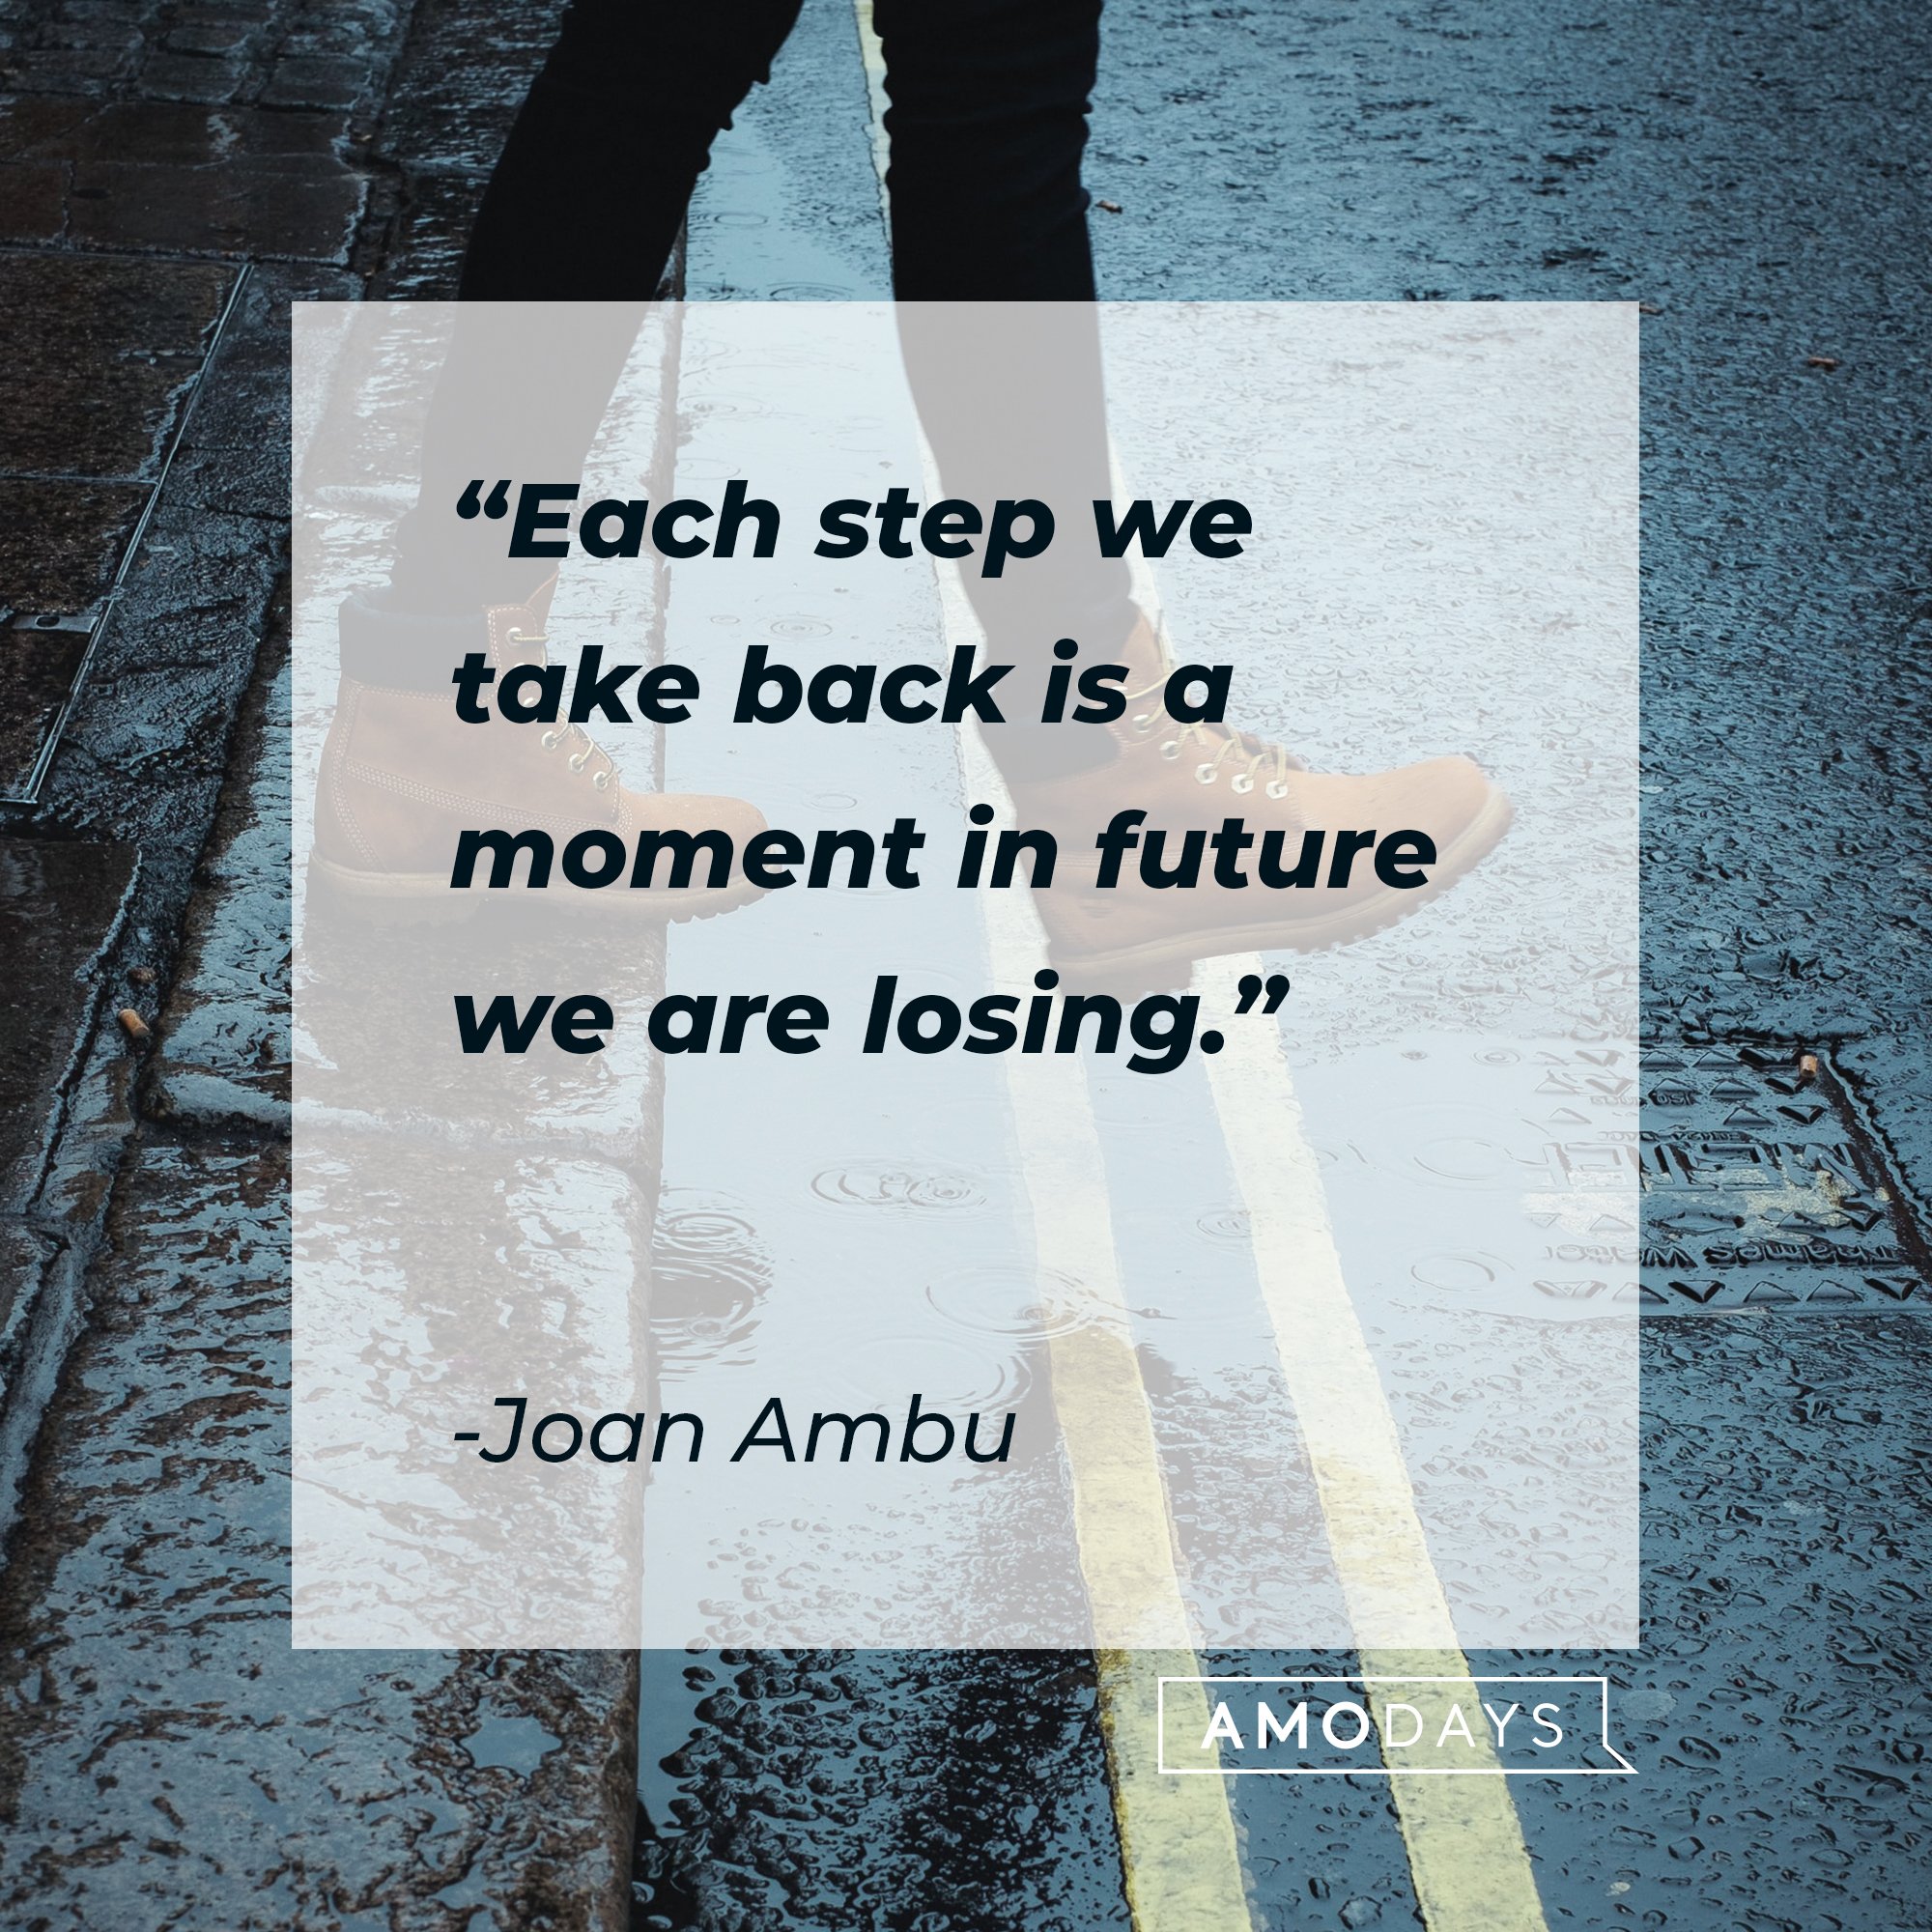  Joan Ambu’s quote: "Each step we take back is a moment in future we are losing." | Image: AmoDays